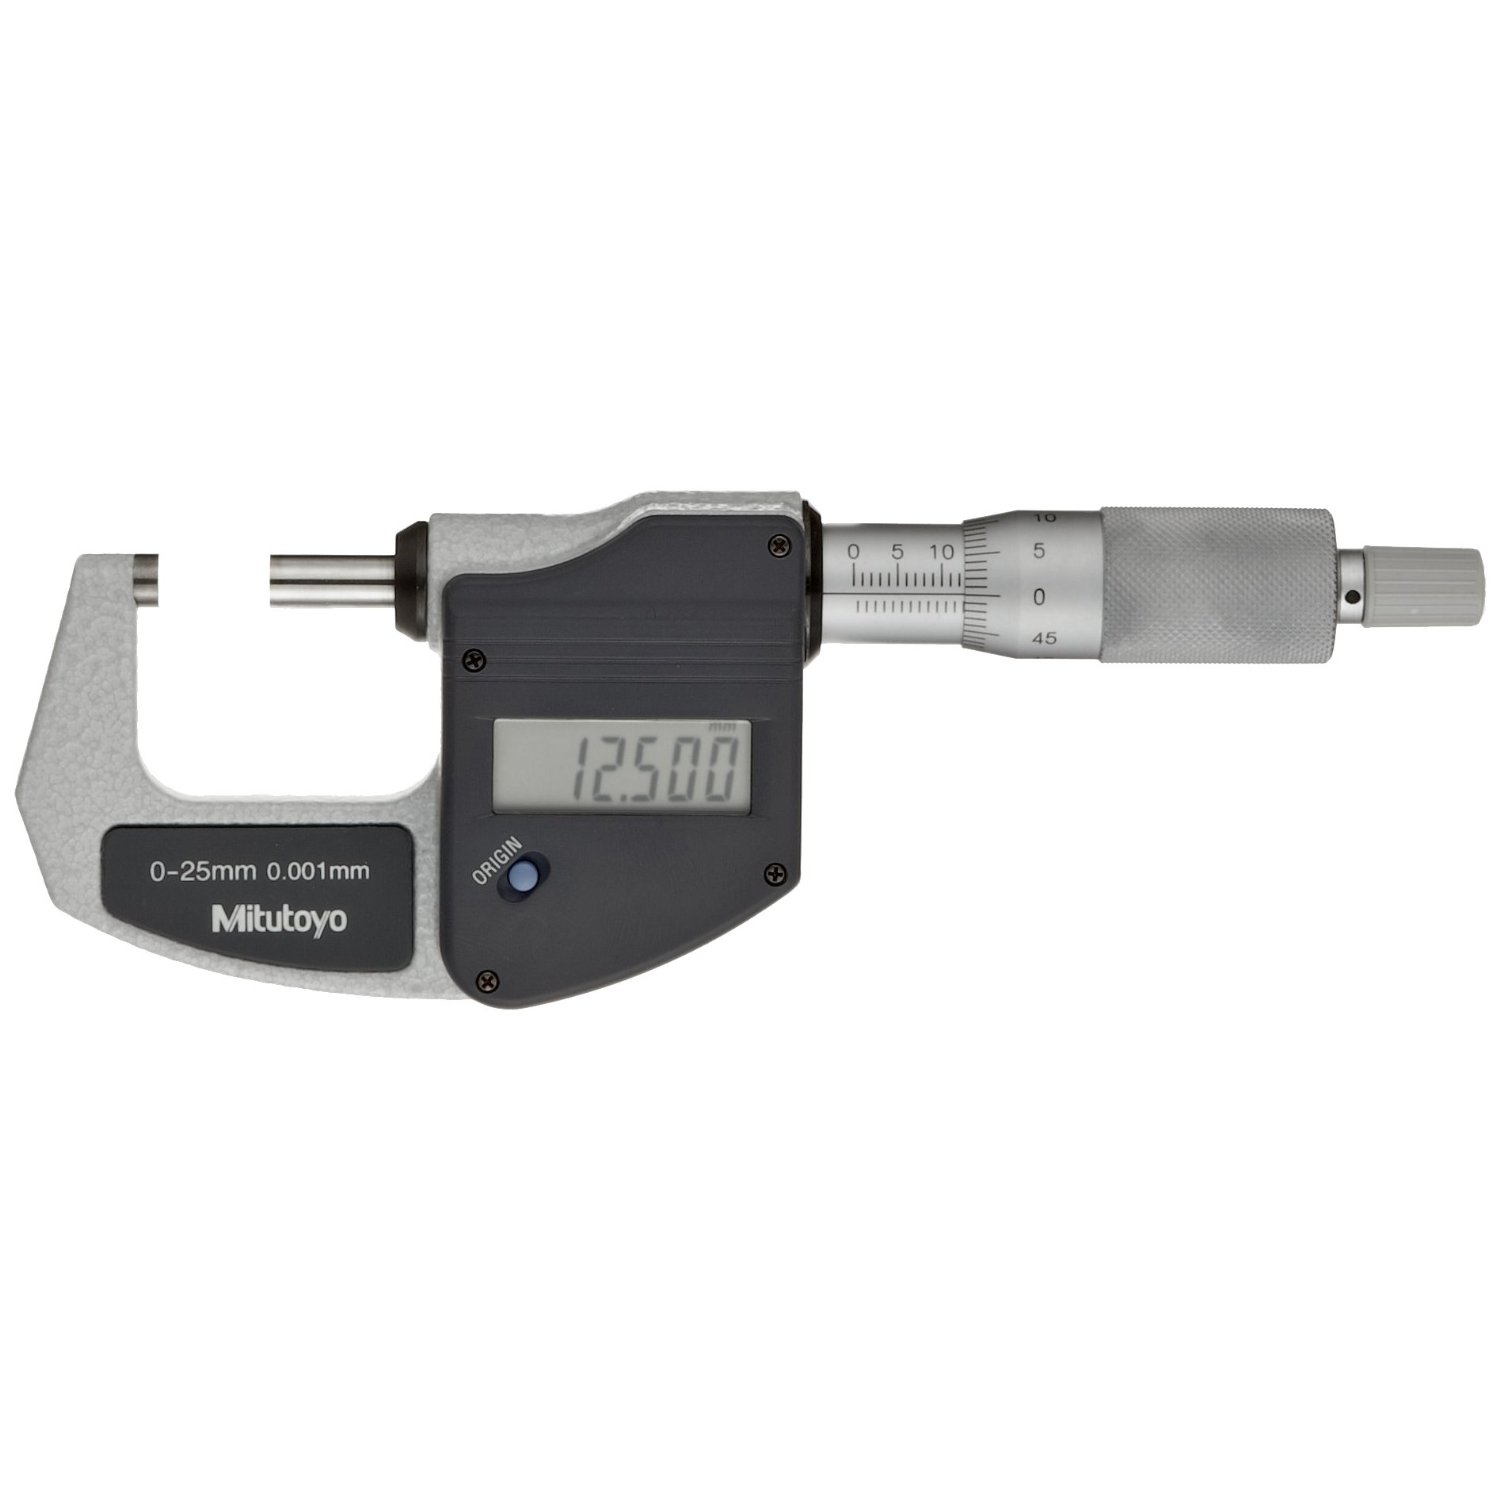 Mitutoyo 293-821 LCD Digimatic Micrometer - Click Image to Close